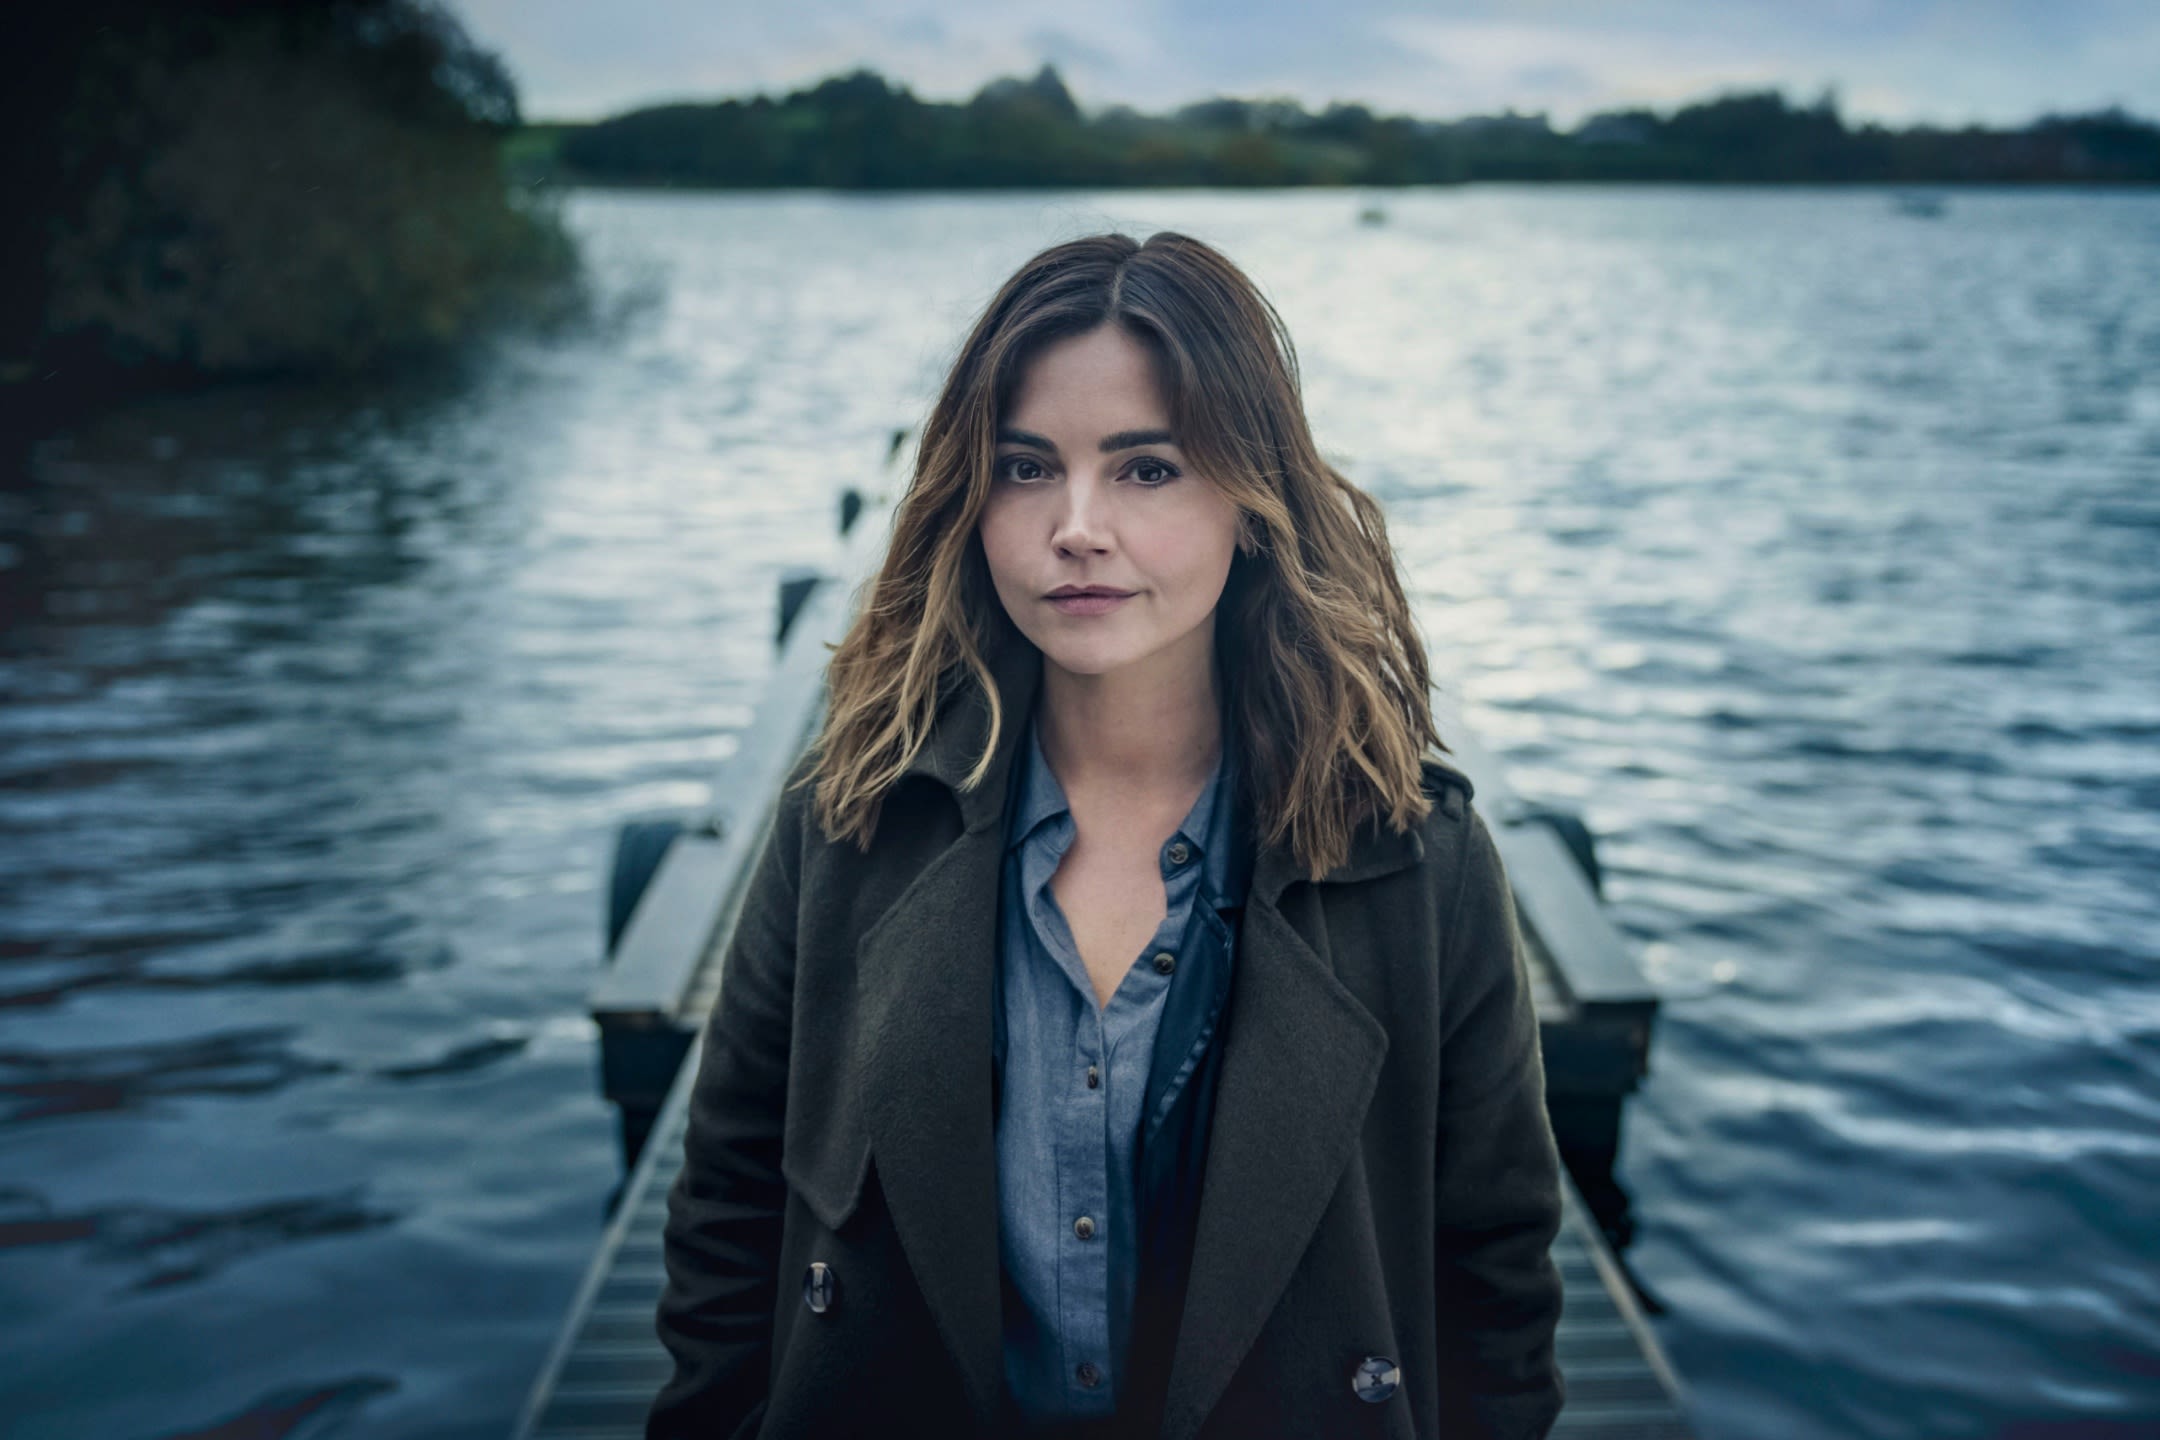 ‘The Jetty’ Star Jenna Coleman on Ember’s Murky Past and That Shocking Twist: ‘The Ending Used to Be Extremely Different’